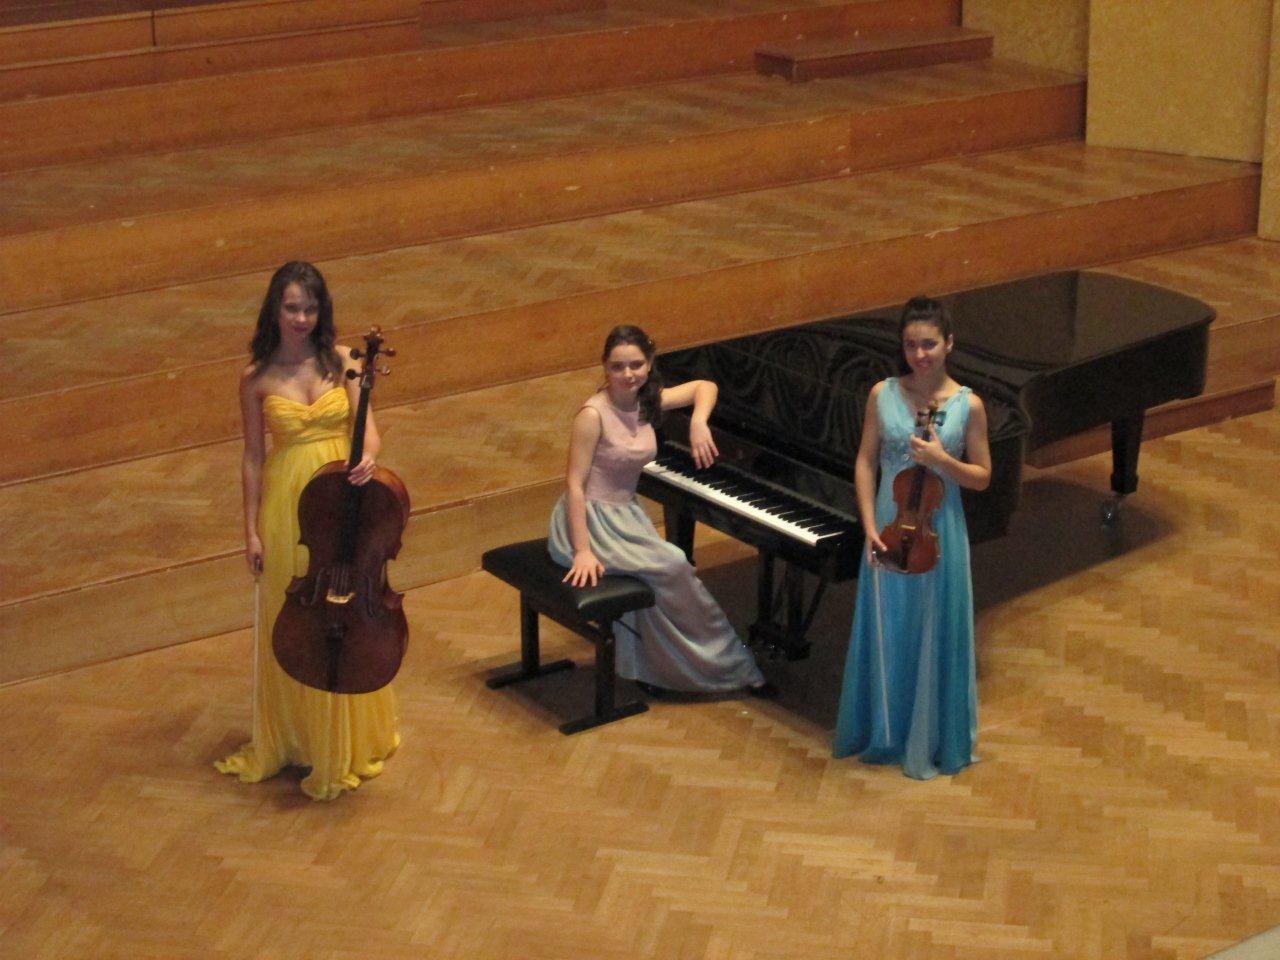 Brussels Royal Conservatory, 2012